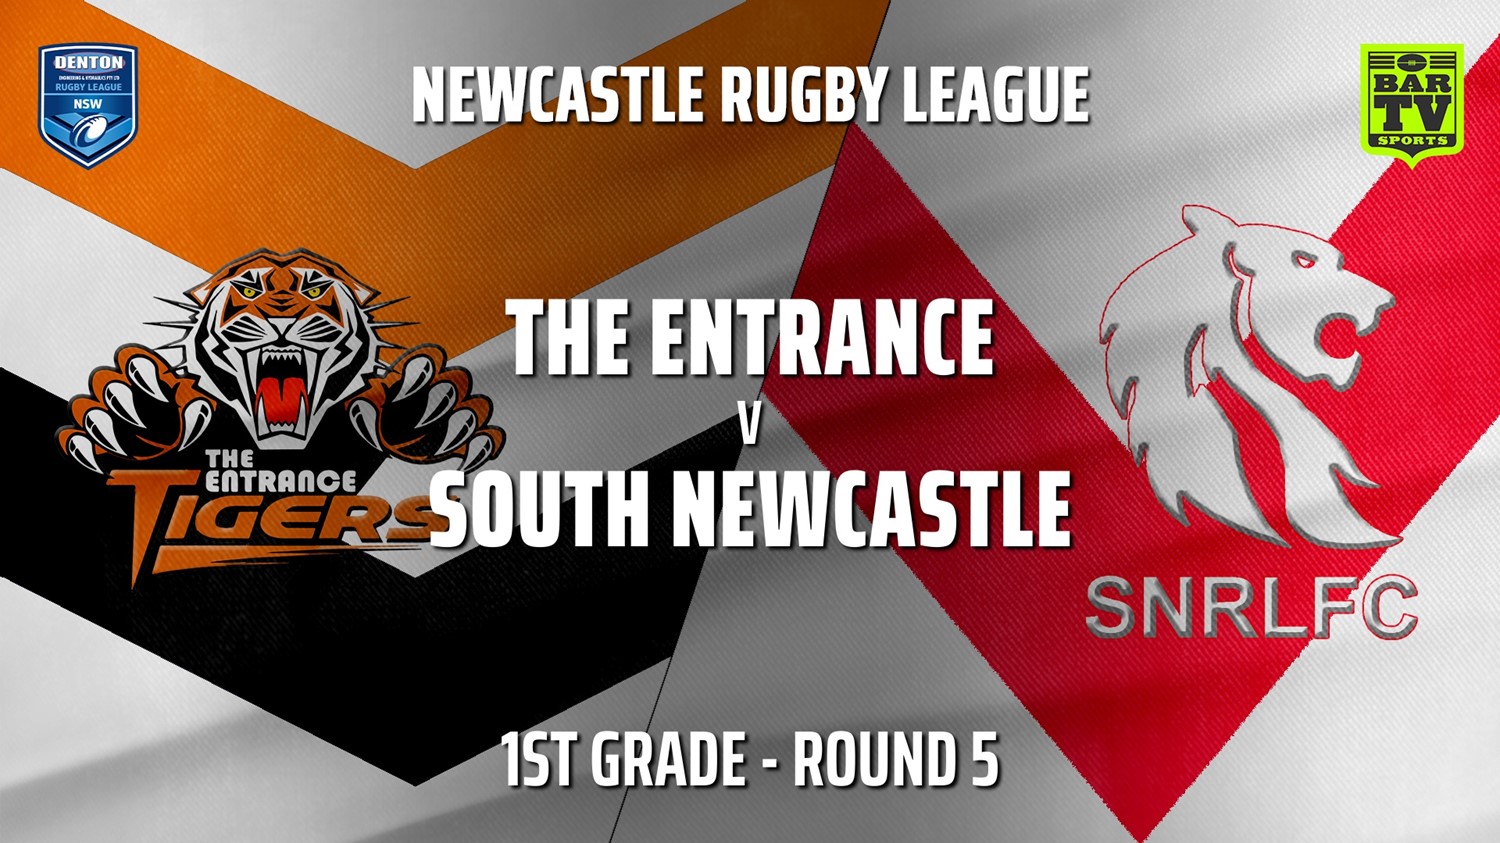 210422-Newcastle Rugby League Round 5 - 1st Grade - The Entrance Tigers v South Newcastle Slate Image